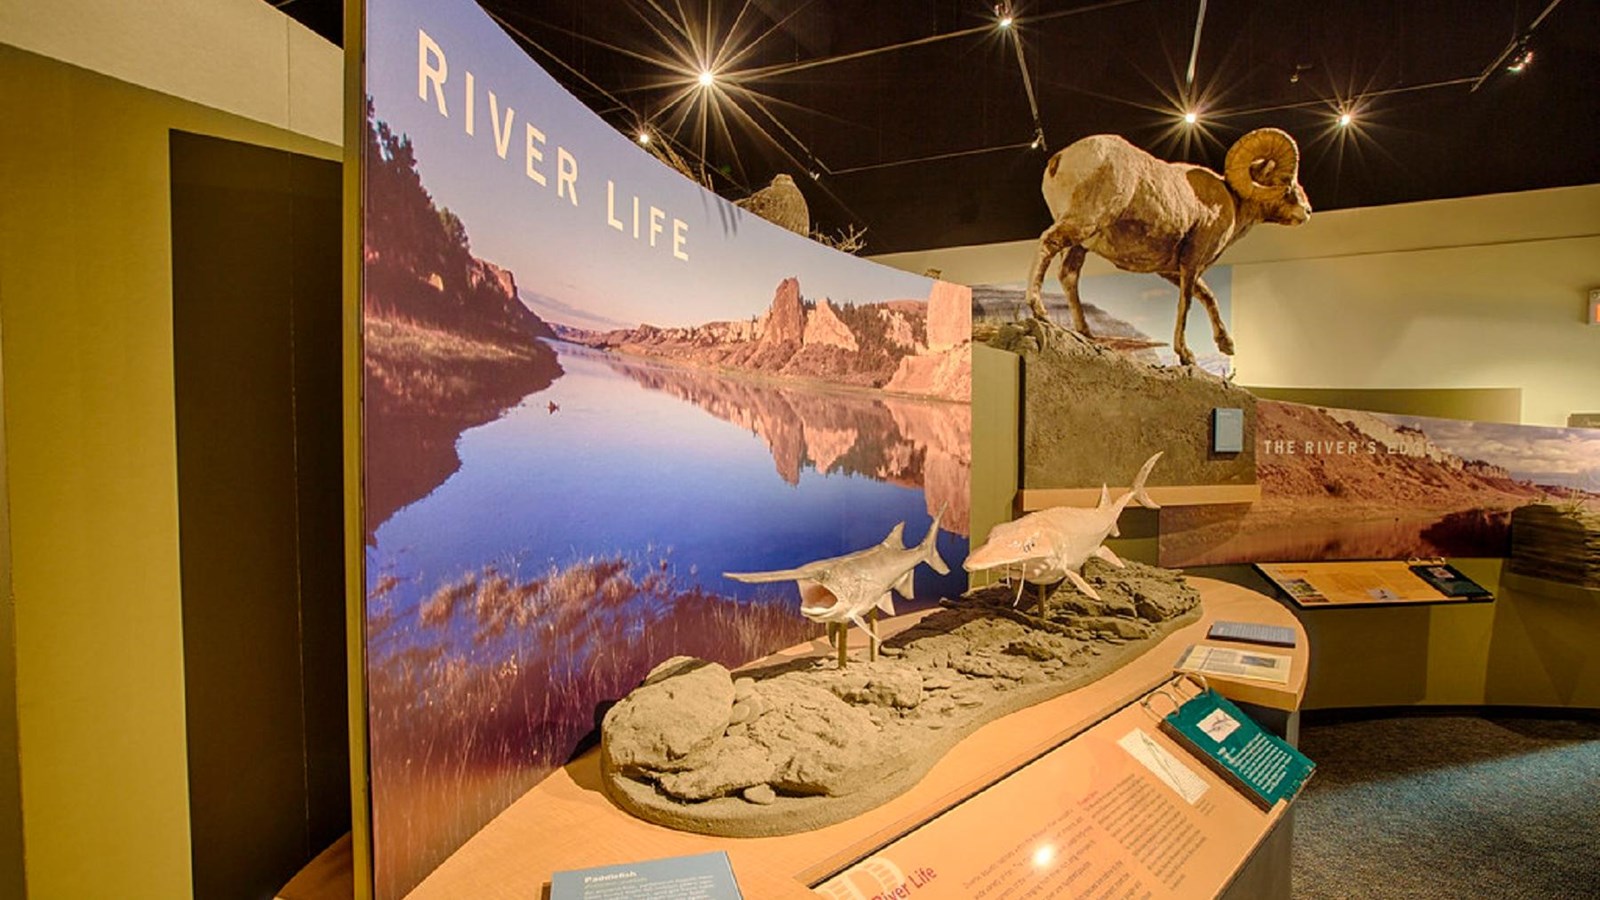 A museum exhibit with a scene of the Missouri river, 3-dimensional fish, and information panels